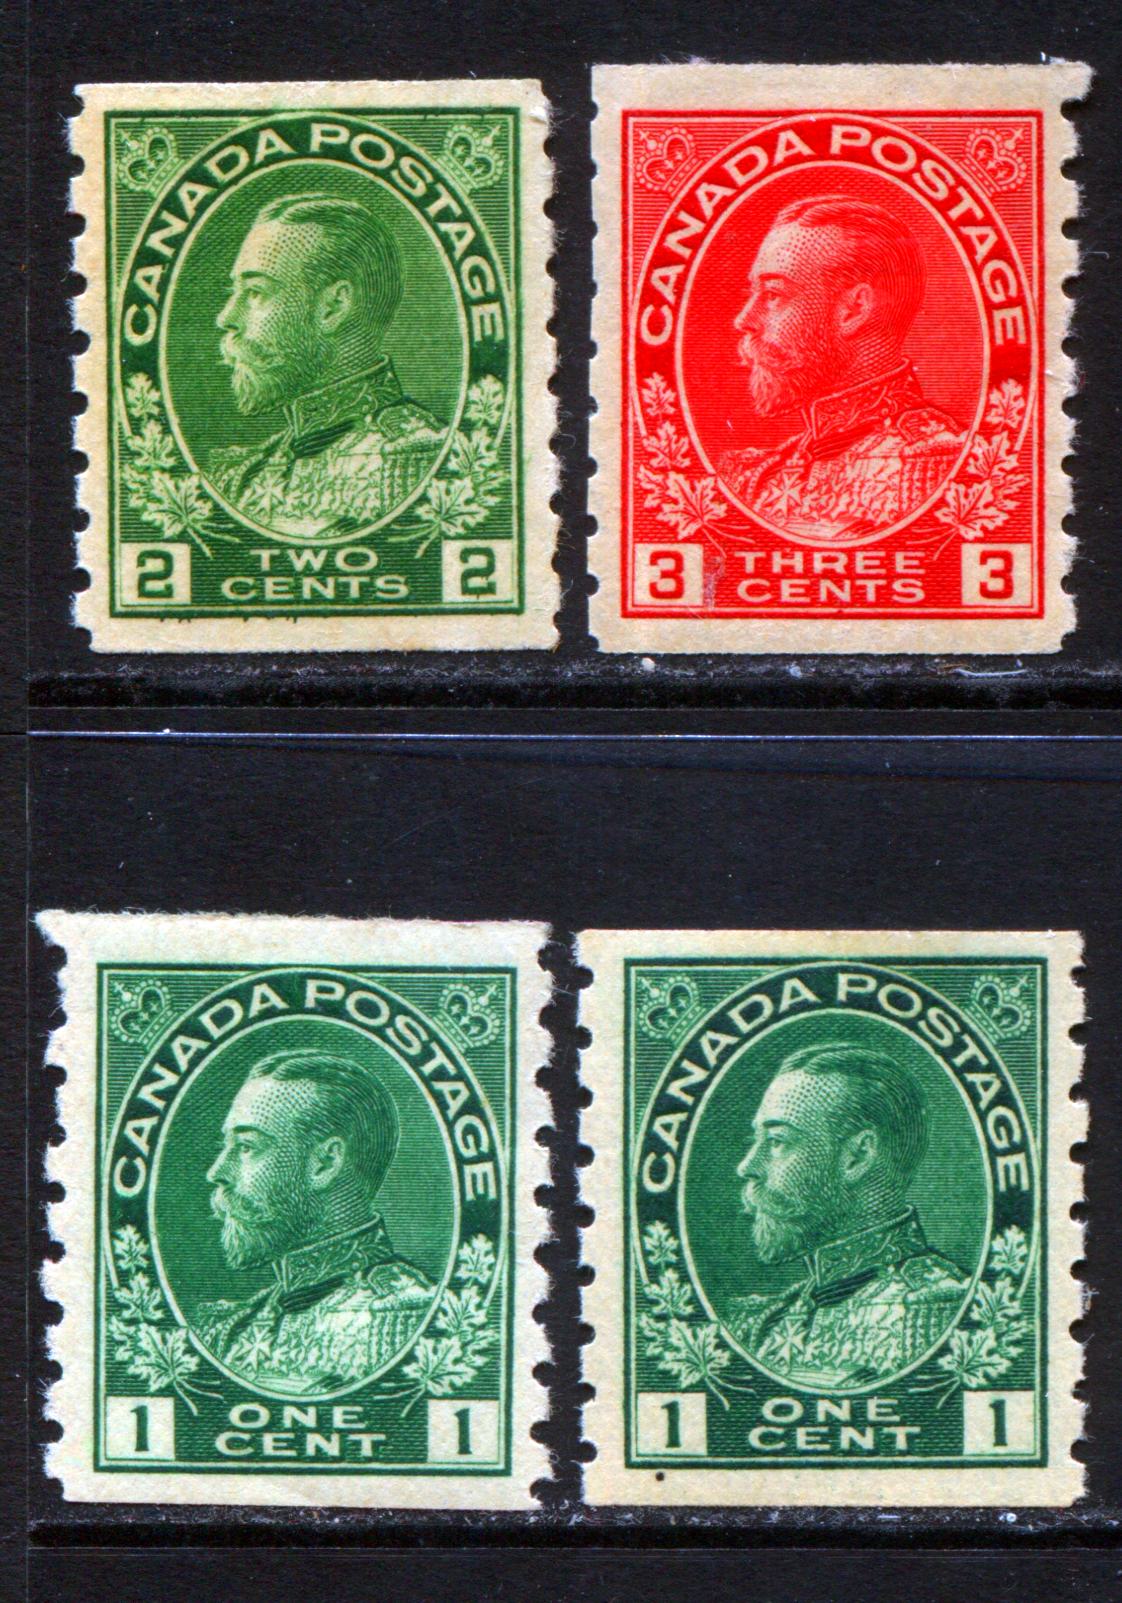 Lot 273 Canada #125, 128, 130 1c, 2c & 3c Green & Carmine King George V, 1911-1925 Admiral Coil Issue, 4 VG-fine OG Coil Singles, Perf 8 Vertical, Two Shades Of 1c, Wet Printings, Die 1